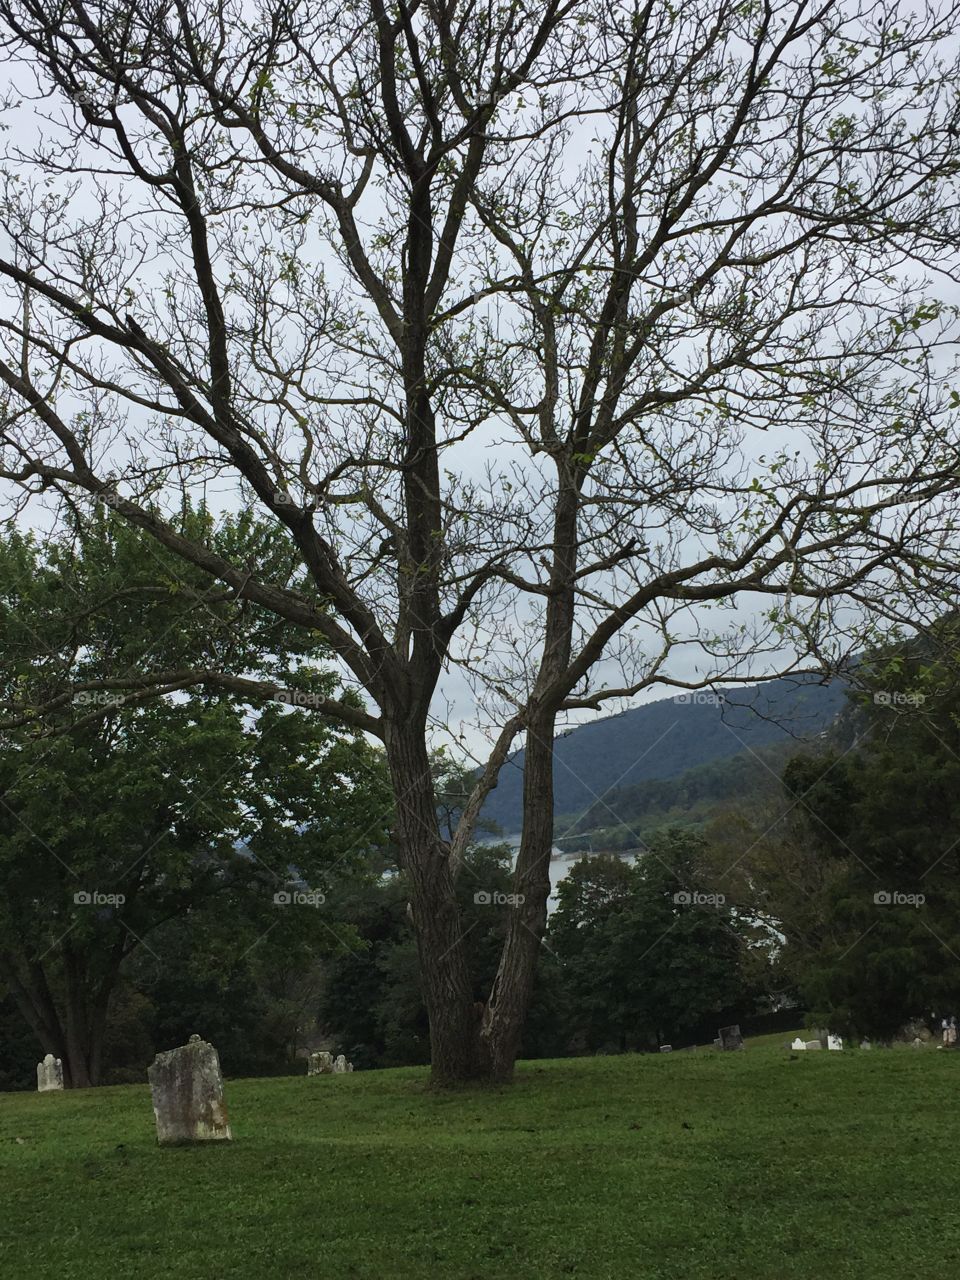 Landscape photo at the Harper’s Ferry cemetery